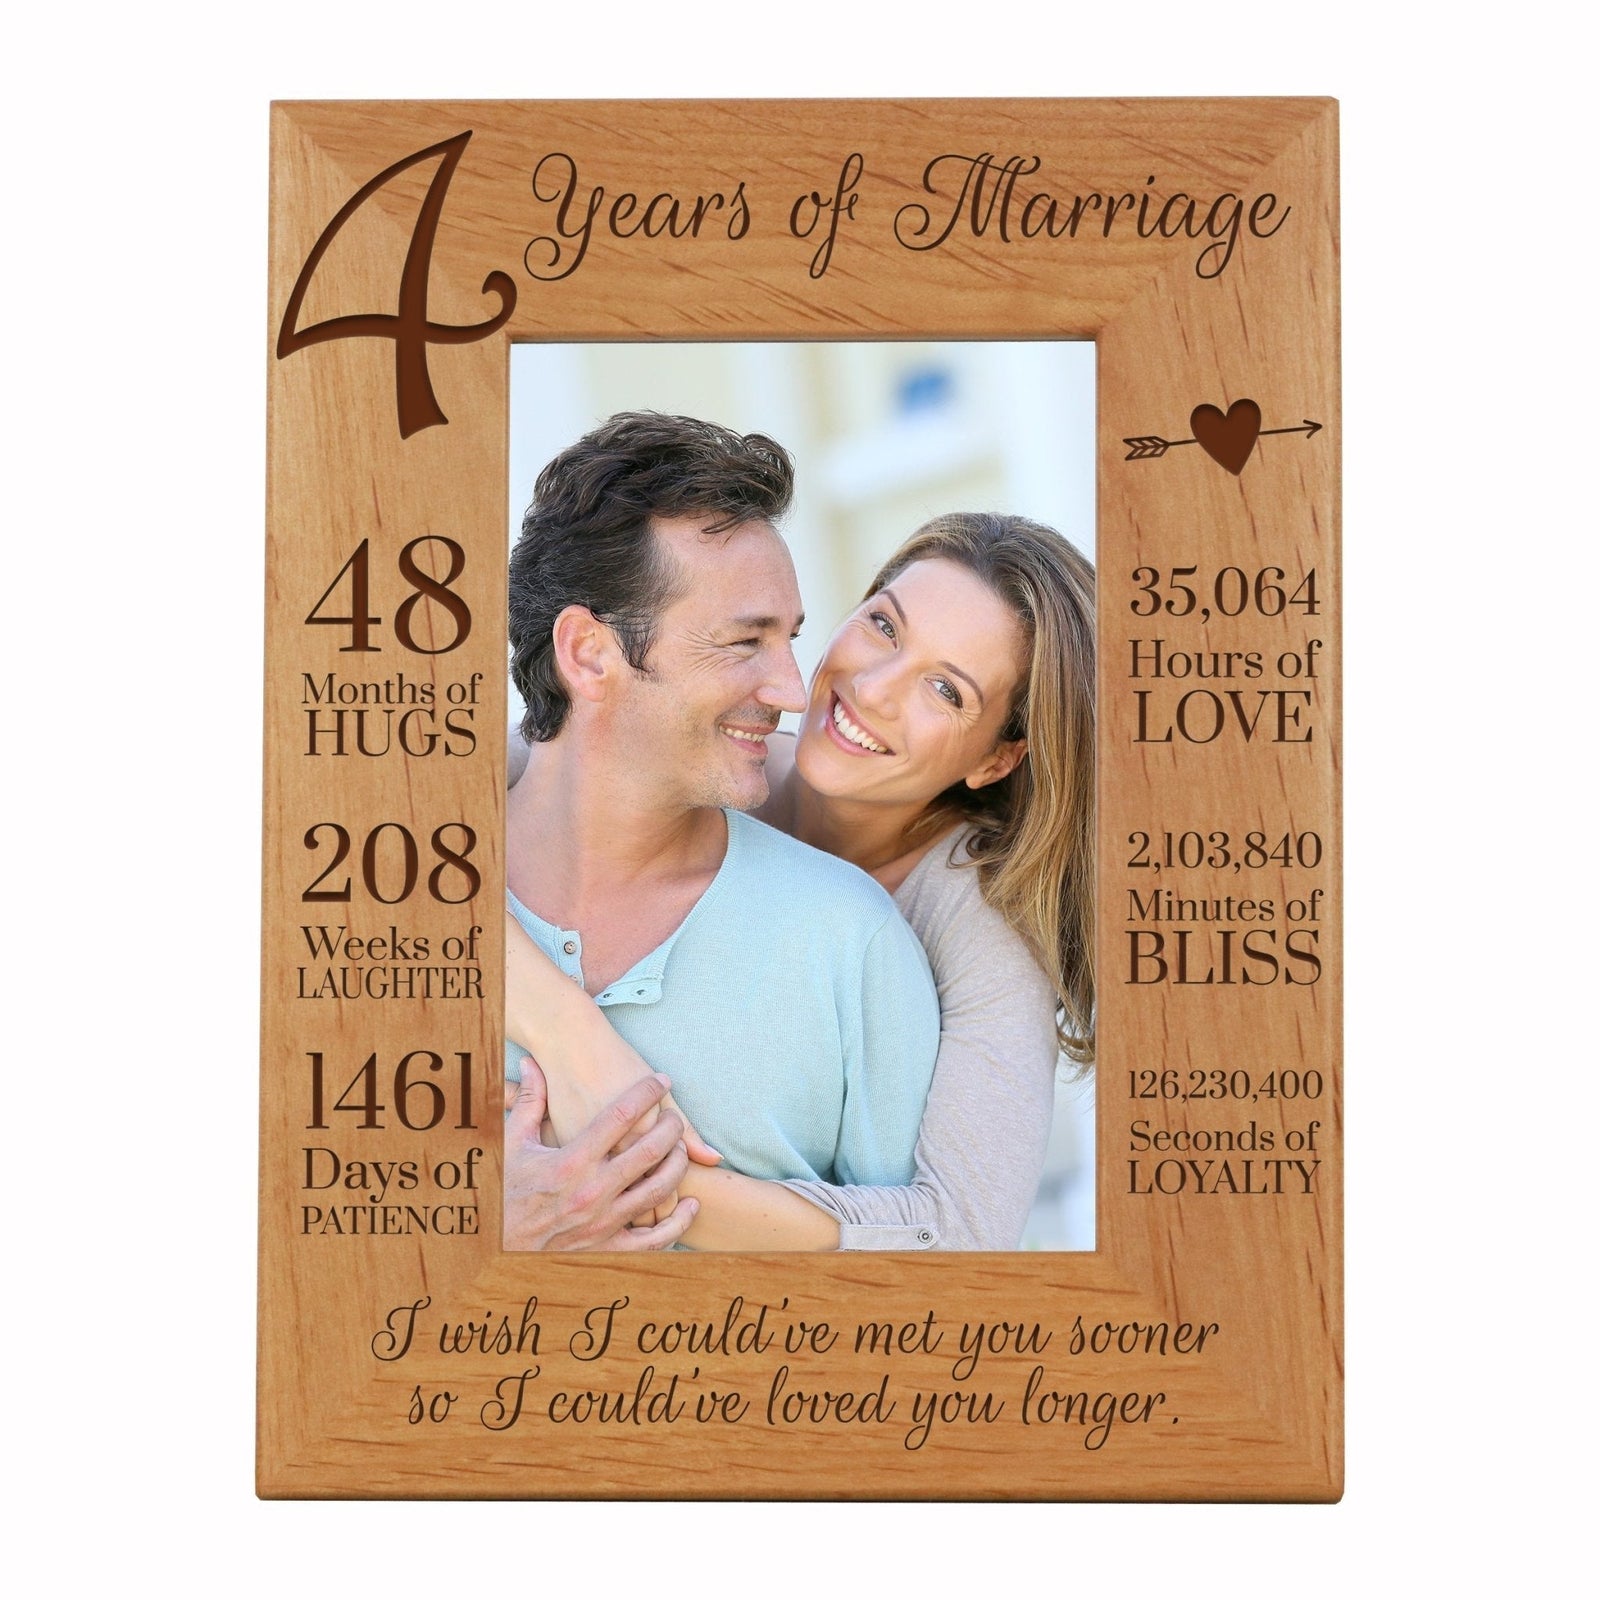 Engraved 4th Wedding Anniversary Photo Frame Wall Decor Gift for Couples - Met You Sooner - LifeSong Milestones